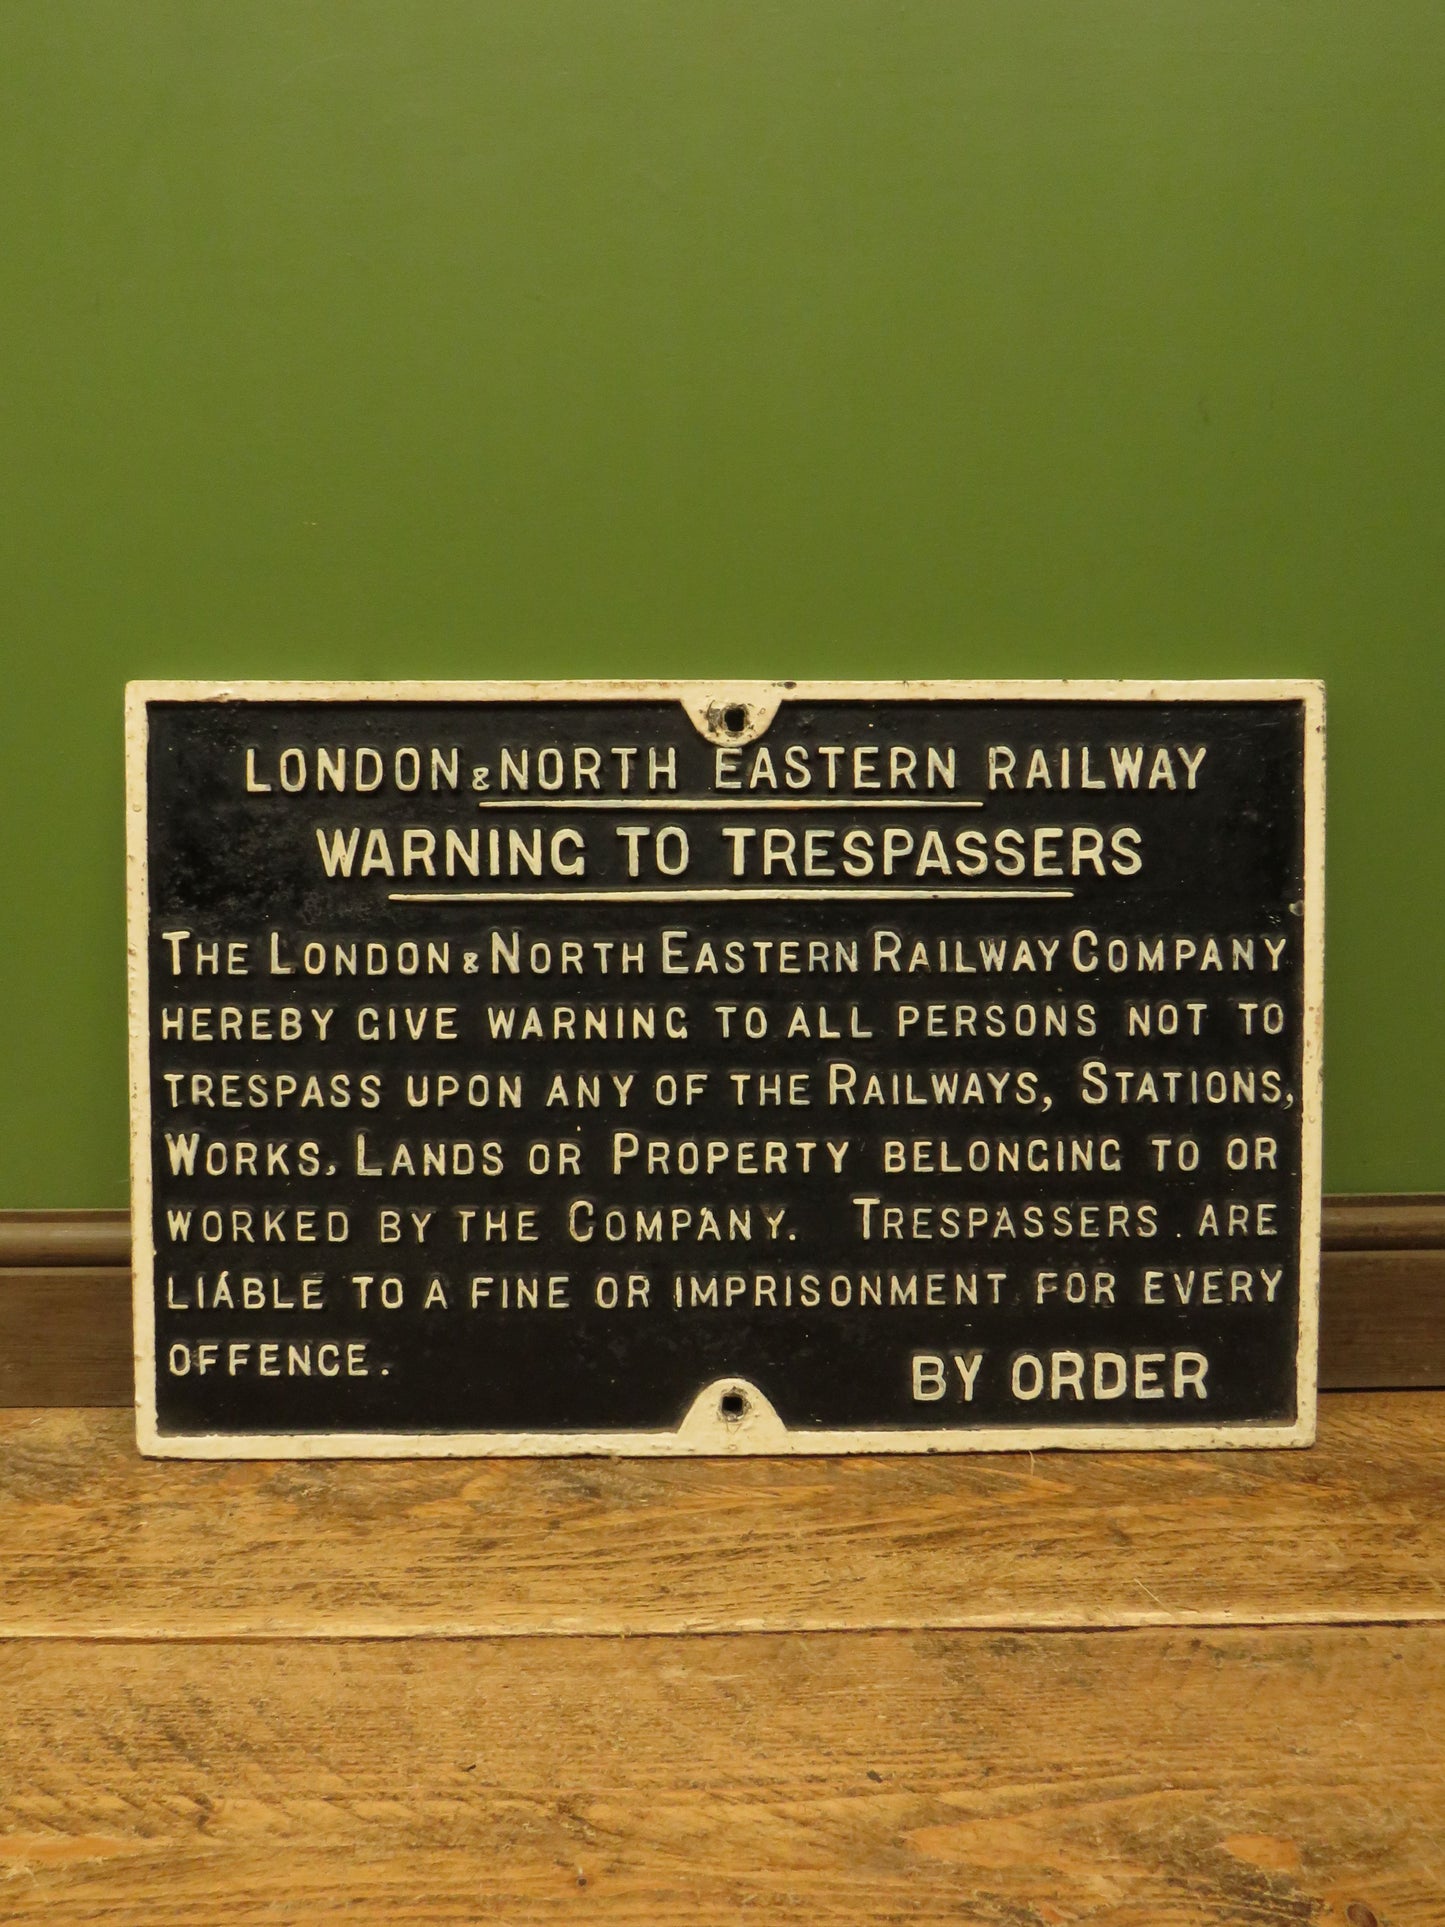 Railway Trespass Warning Sign for London and North Eastern Railway